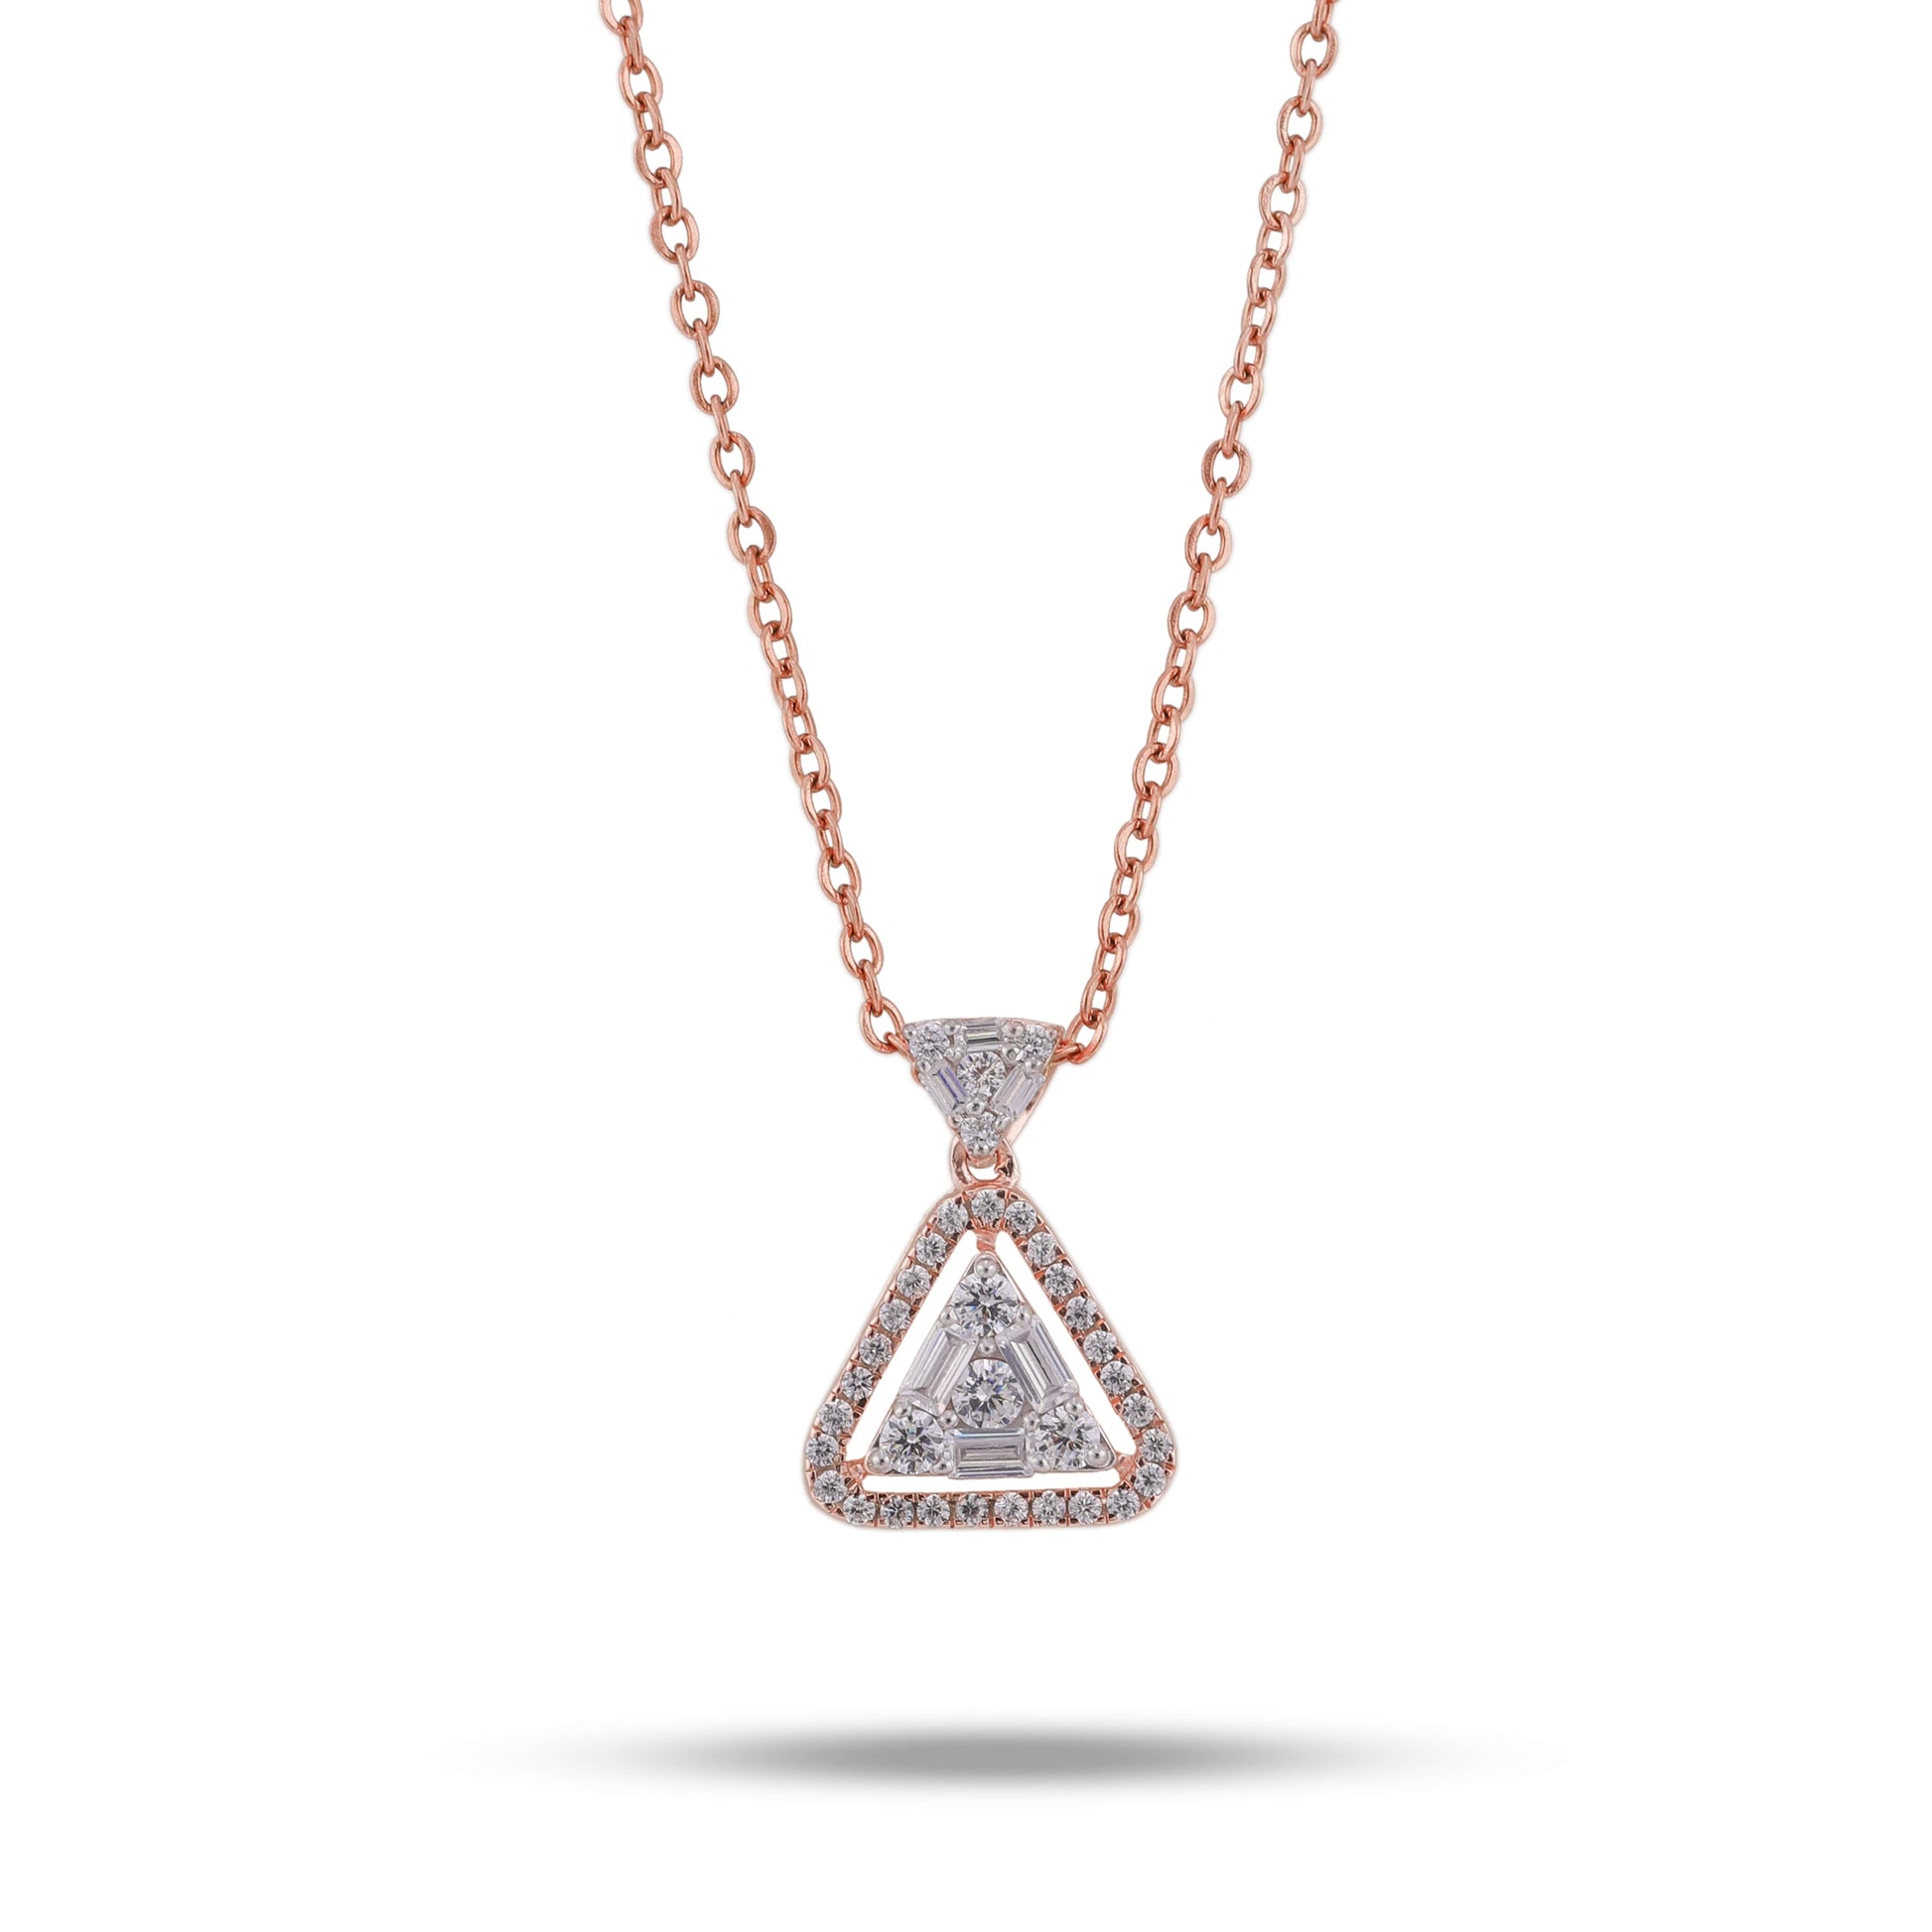 Baguette Diamond Necklace in white gold